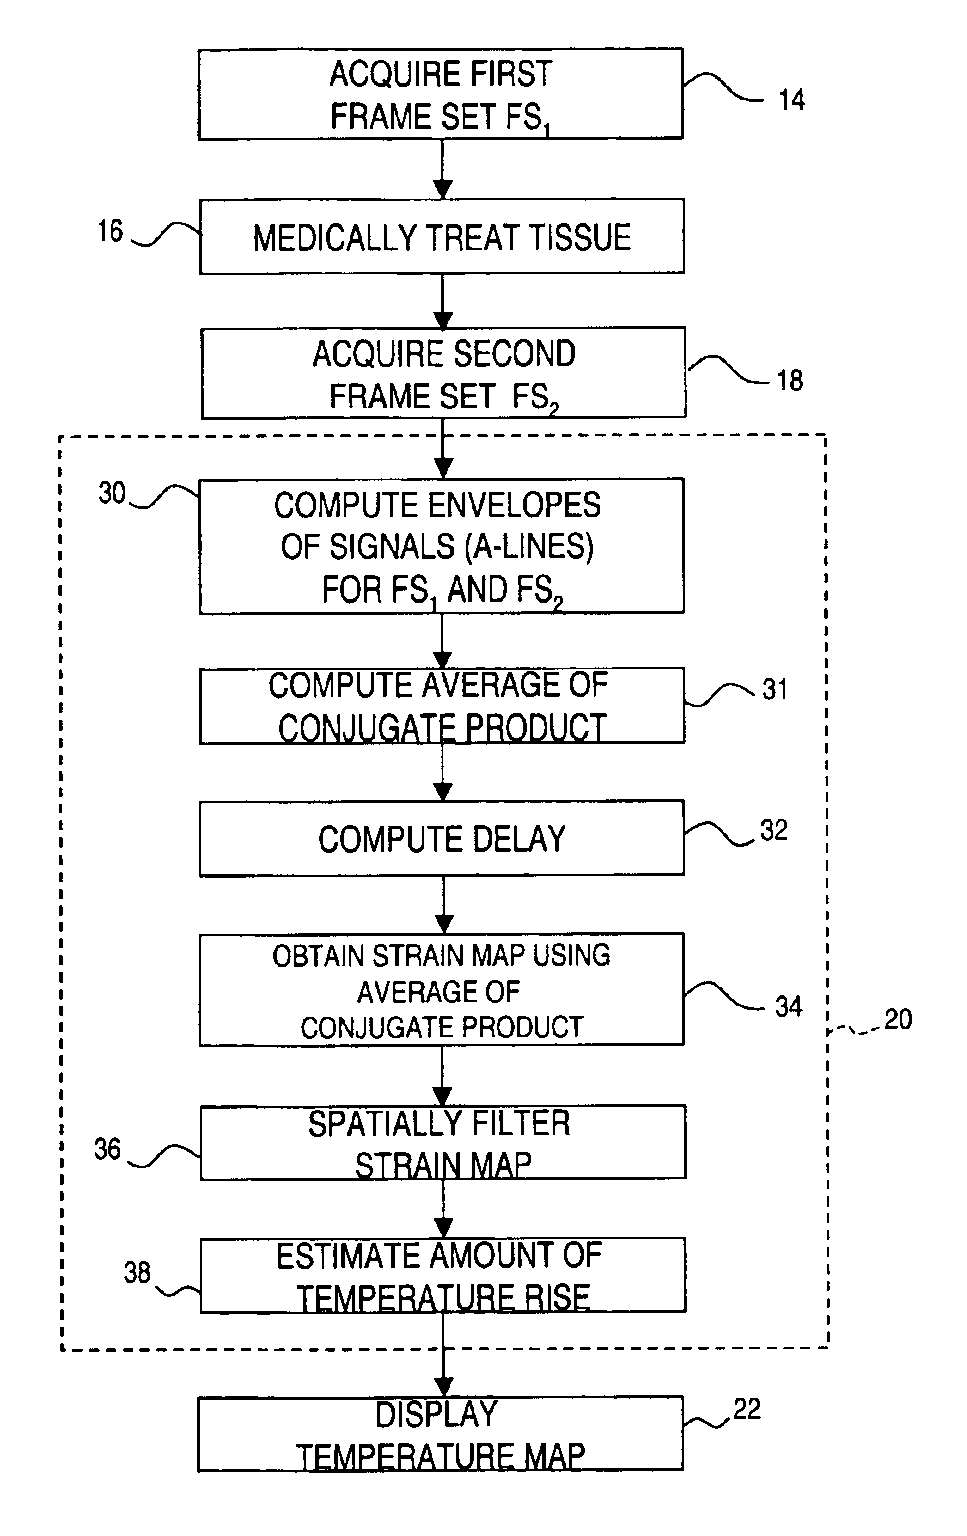 Method for mapping temperature rise using pulse-echo ultrasound